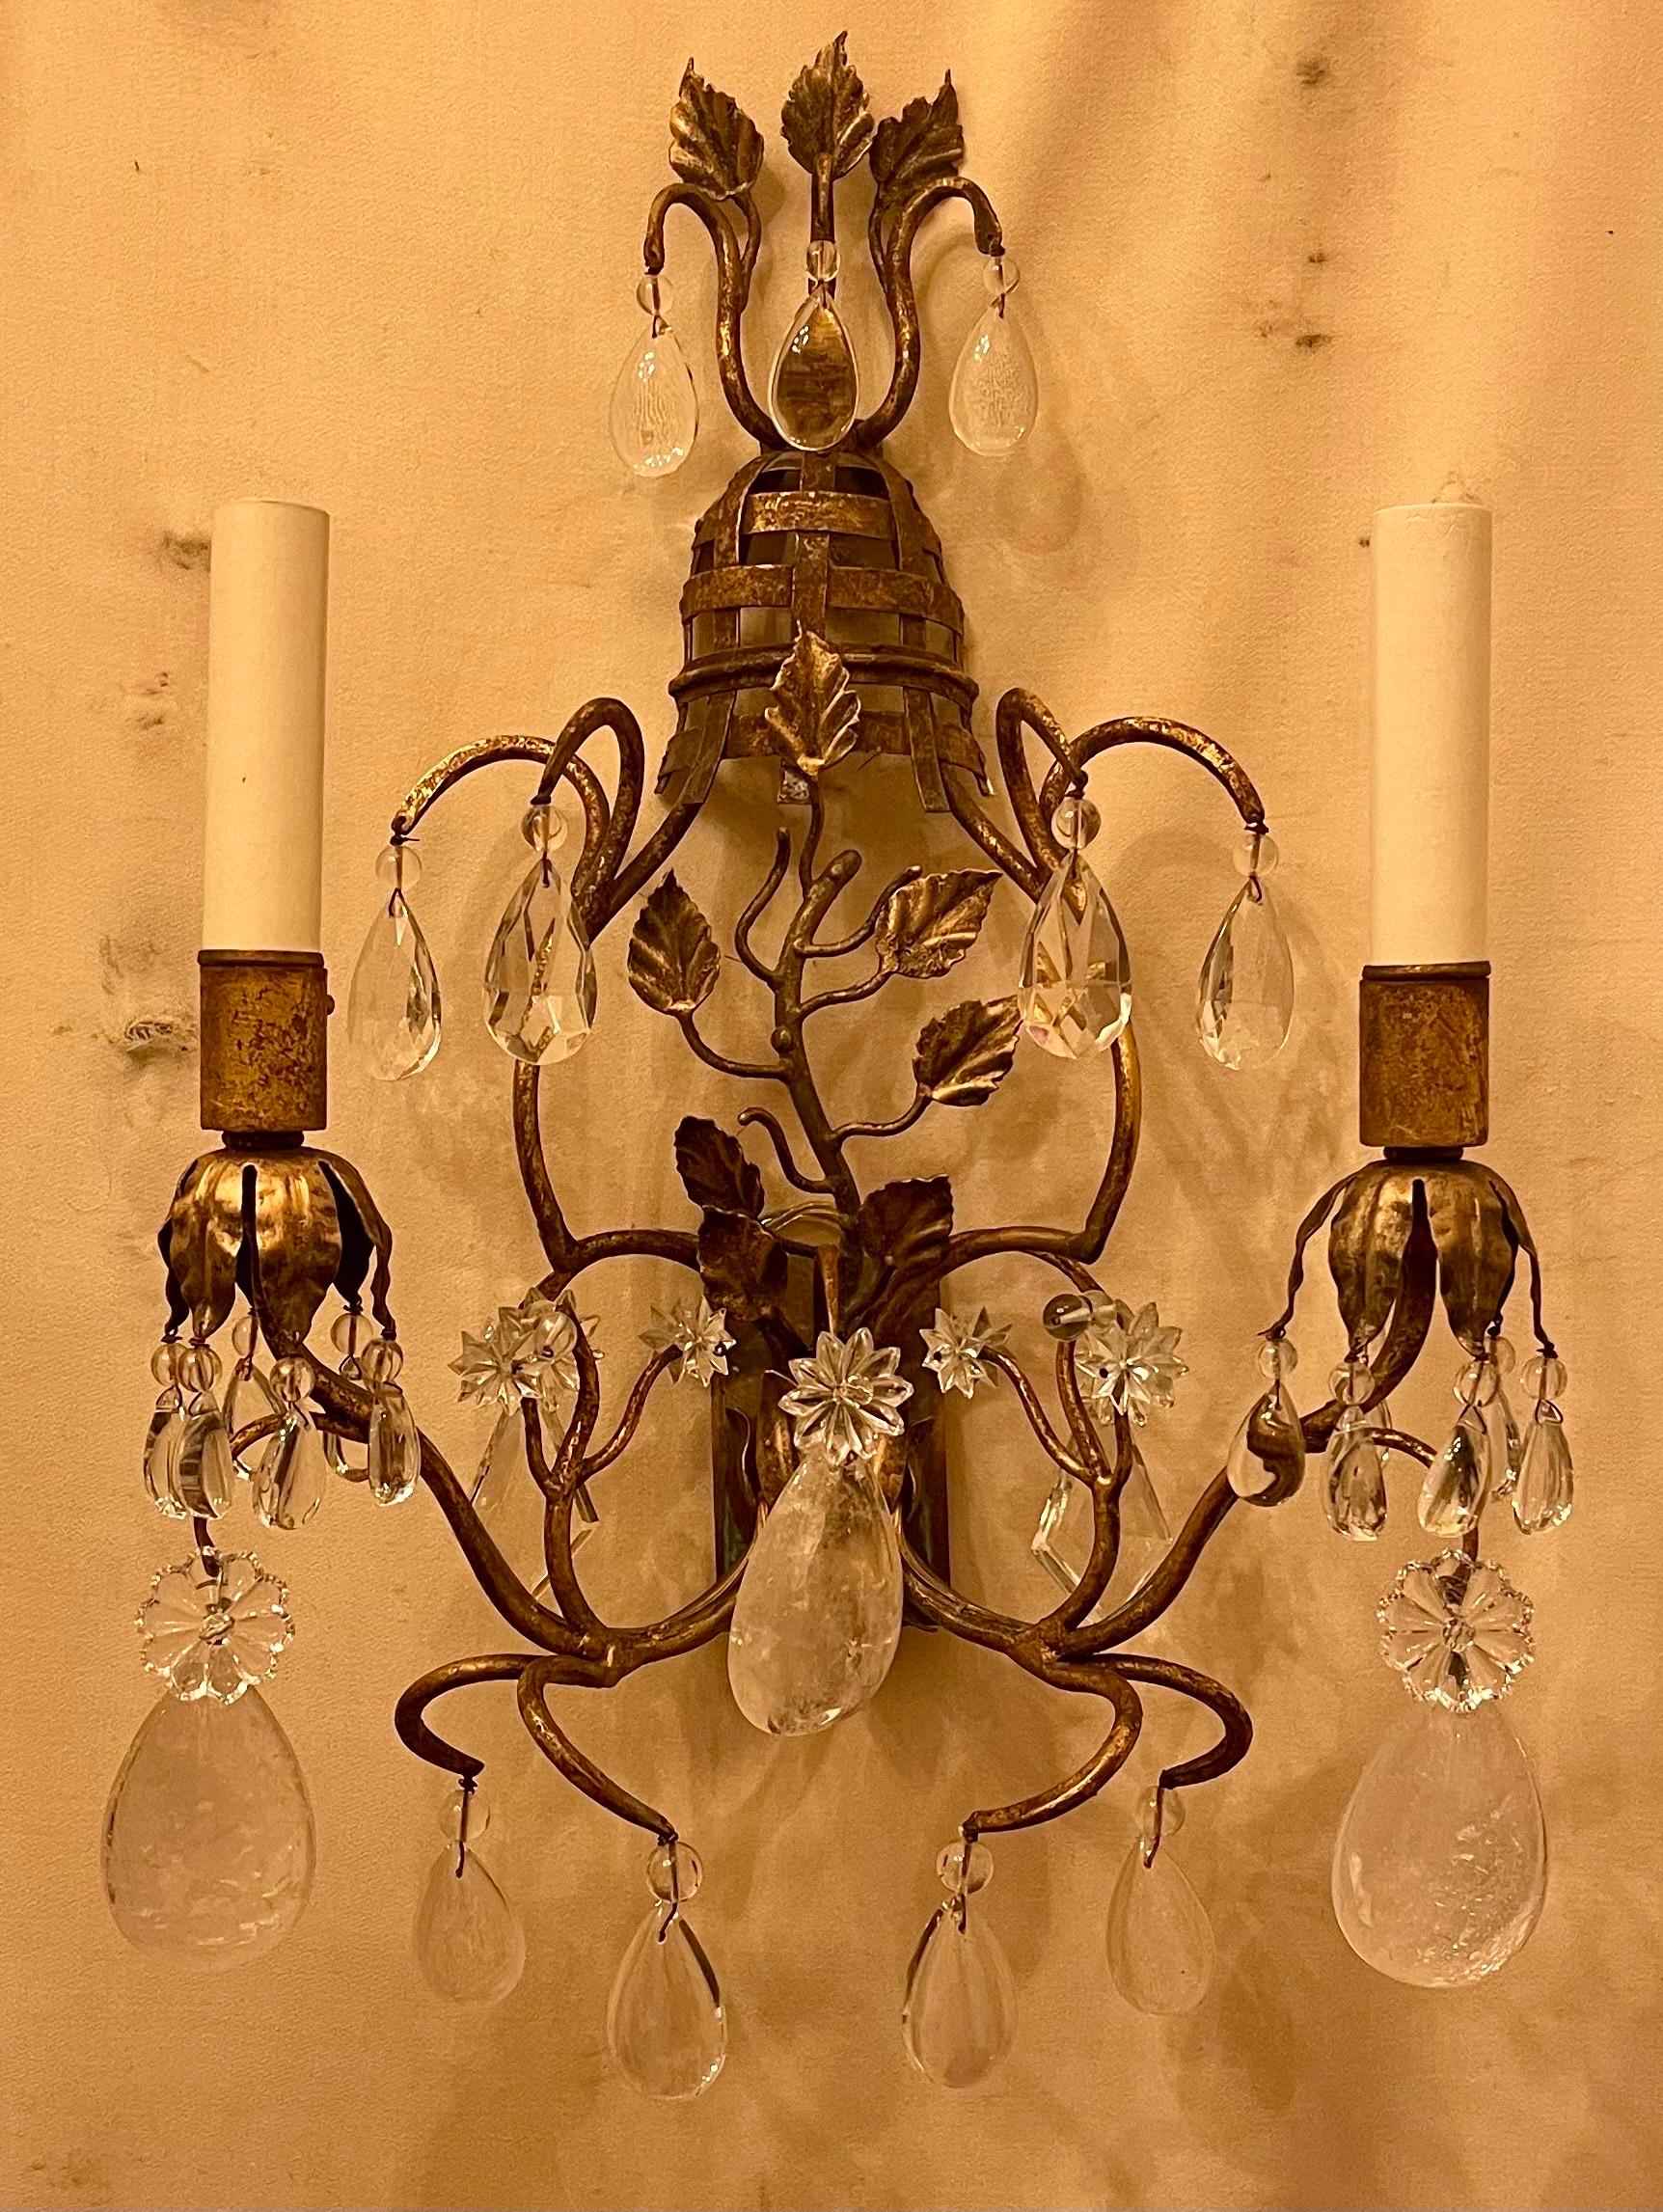 A wonderful pair of French Gold Gilt sconces with crystal & rock crystal drops in a basket bouquet form, in the manner of Maison Baguès.